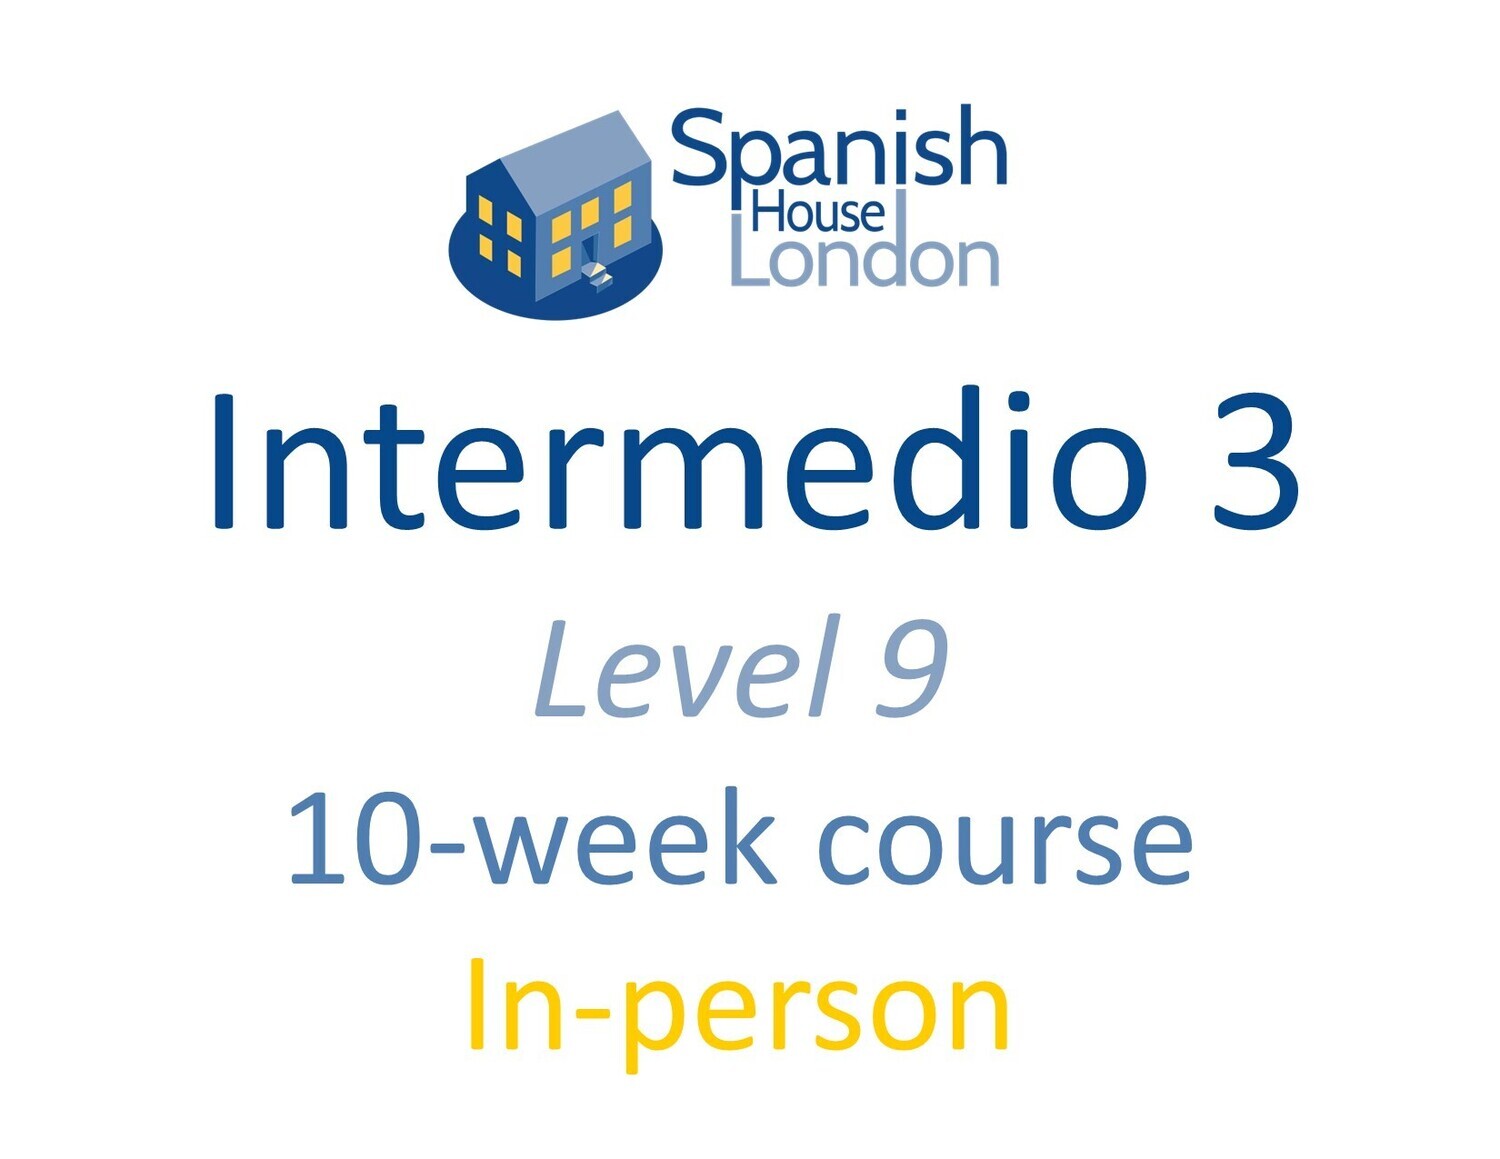 Intermedio 3 Course starting on 20th April at 4.15pm in Clapham North